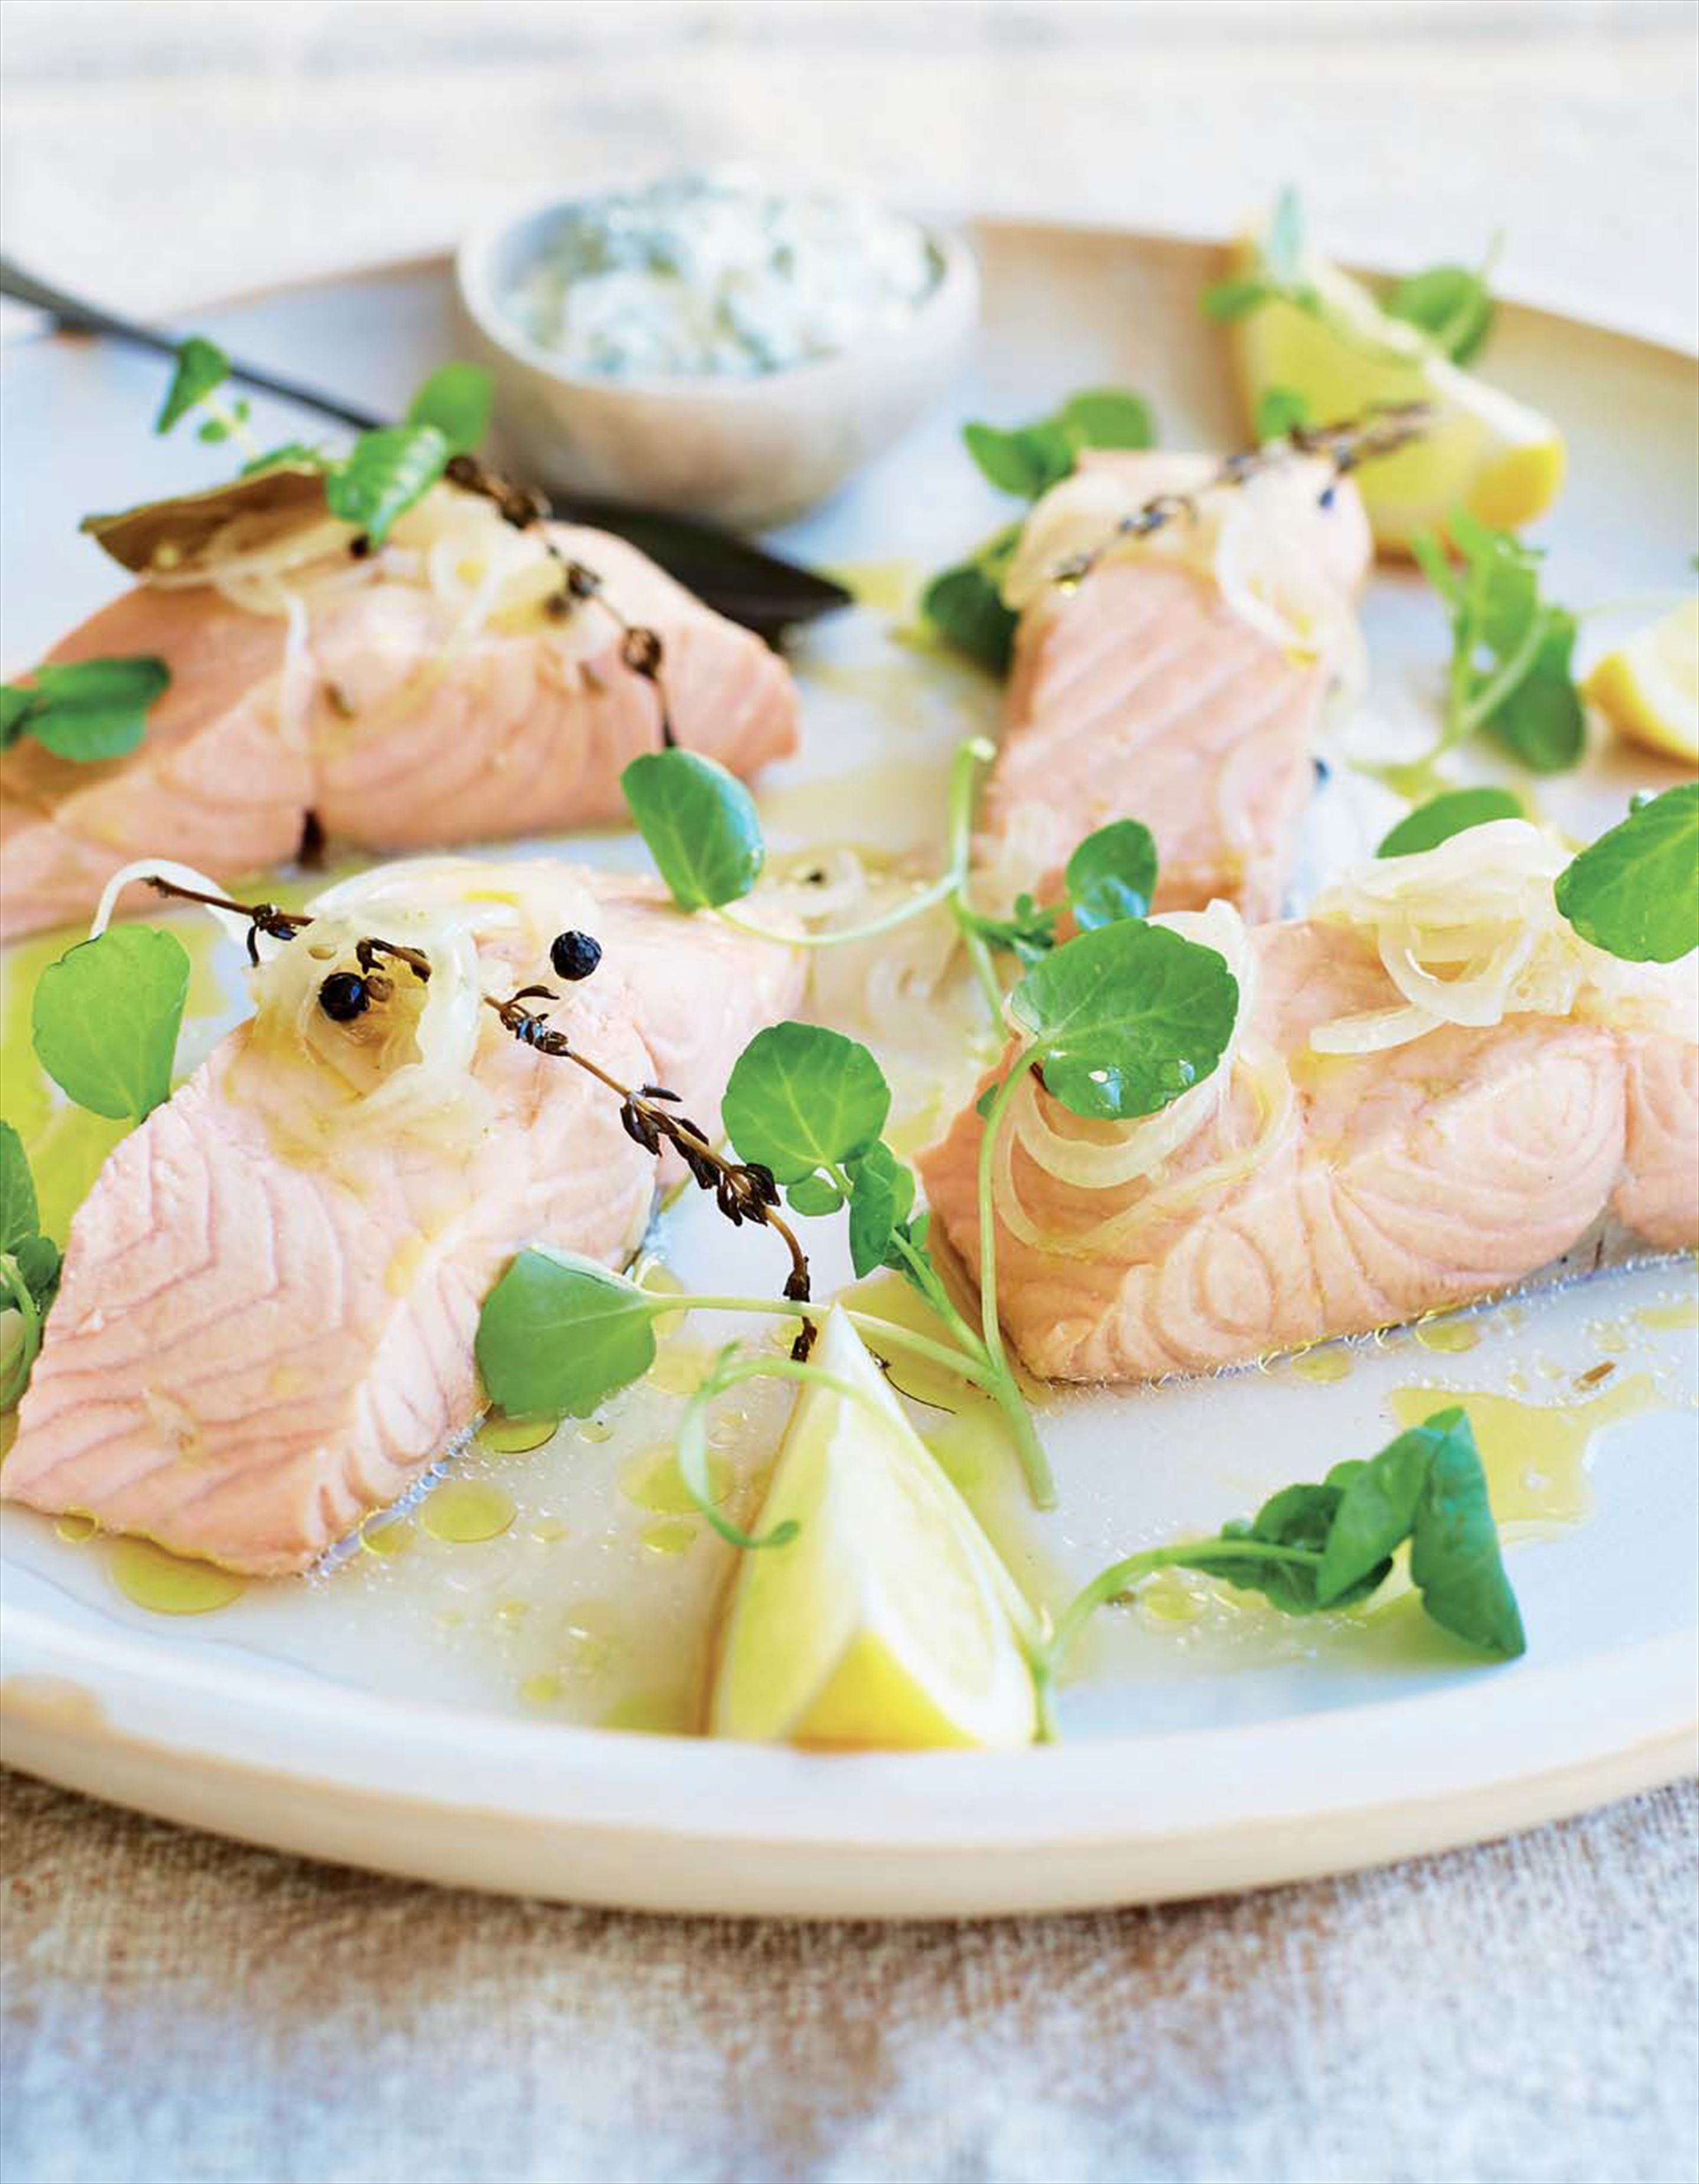 Poached salmon, watercress and olive oil hollandaise